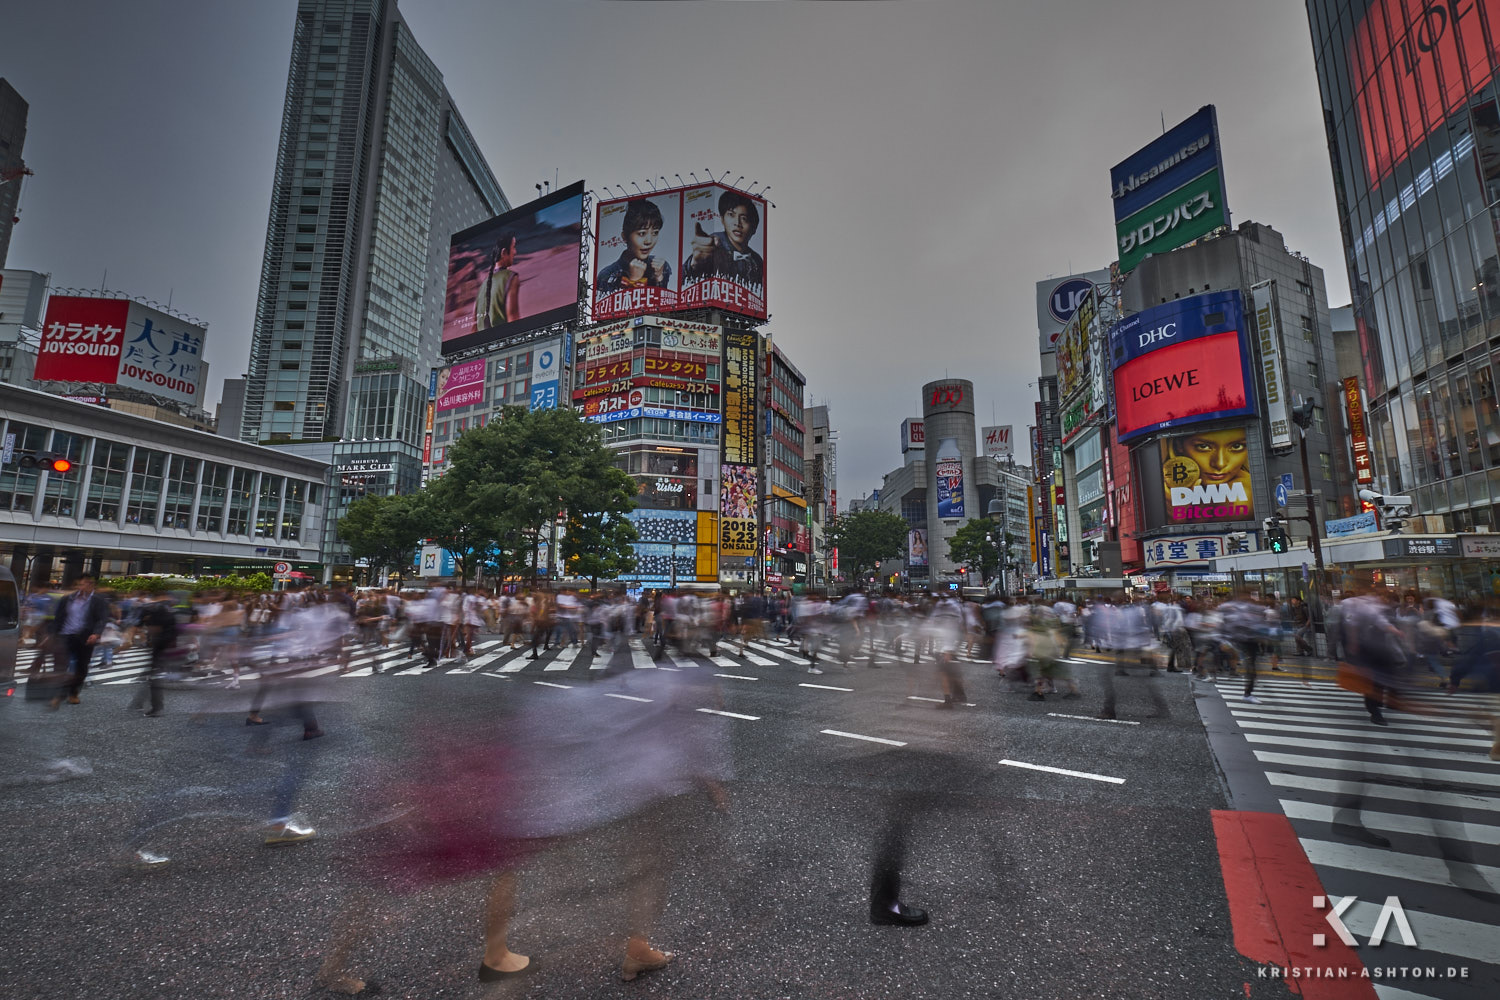 Shibuya Crossing - approximately 15,000 pedestrians cross here during rush hour!